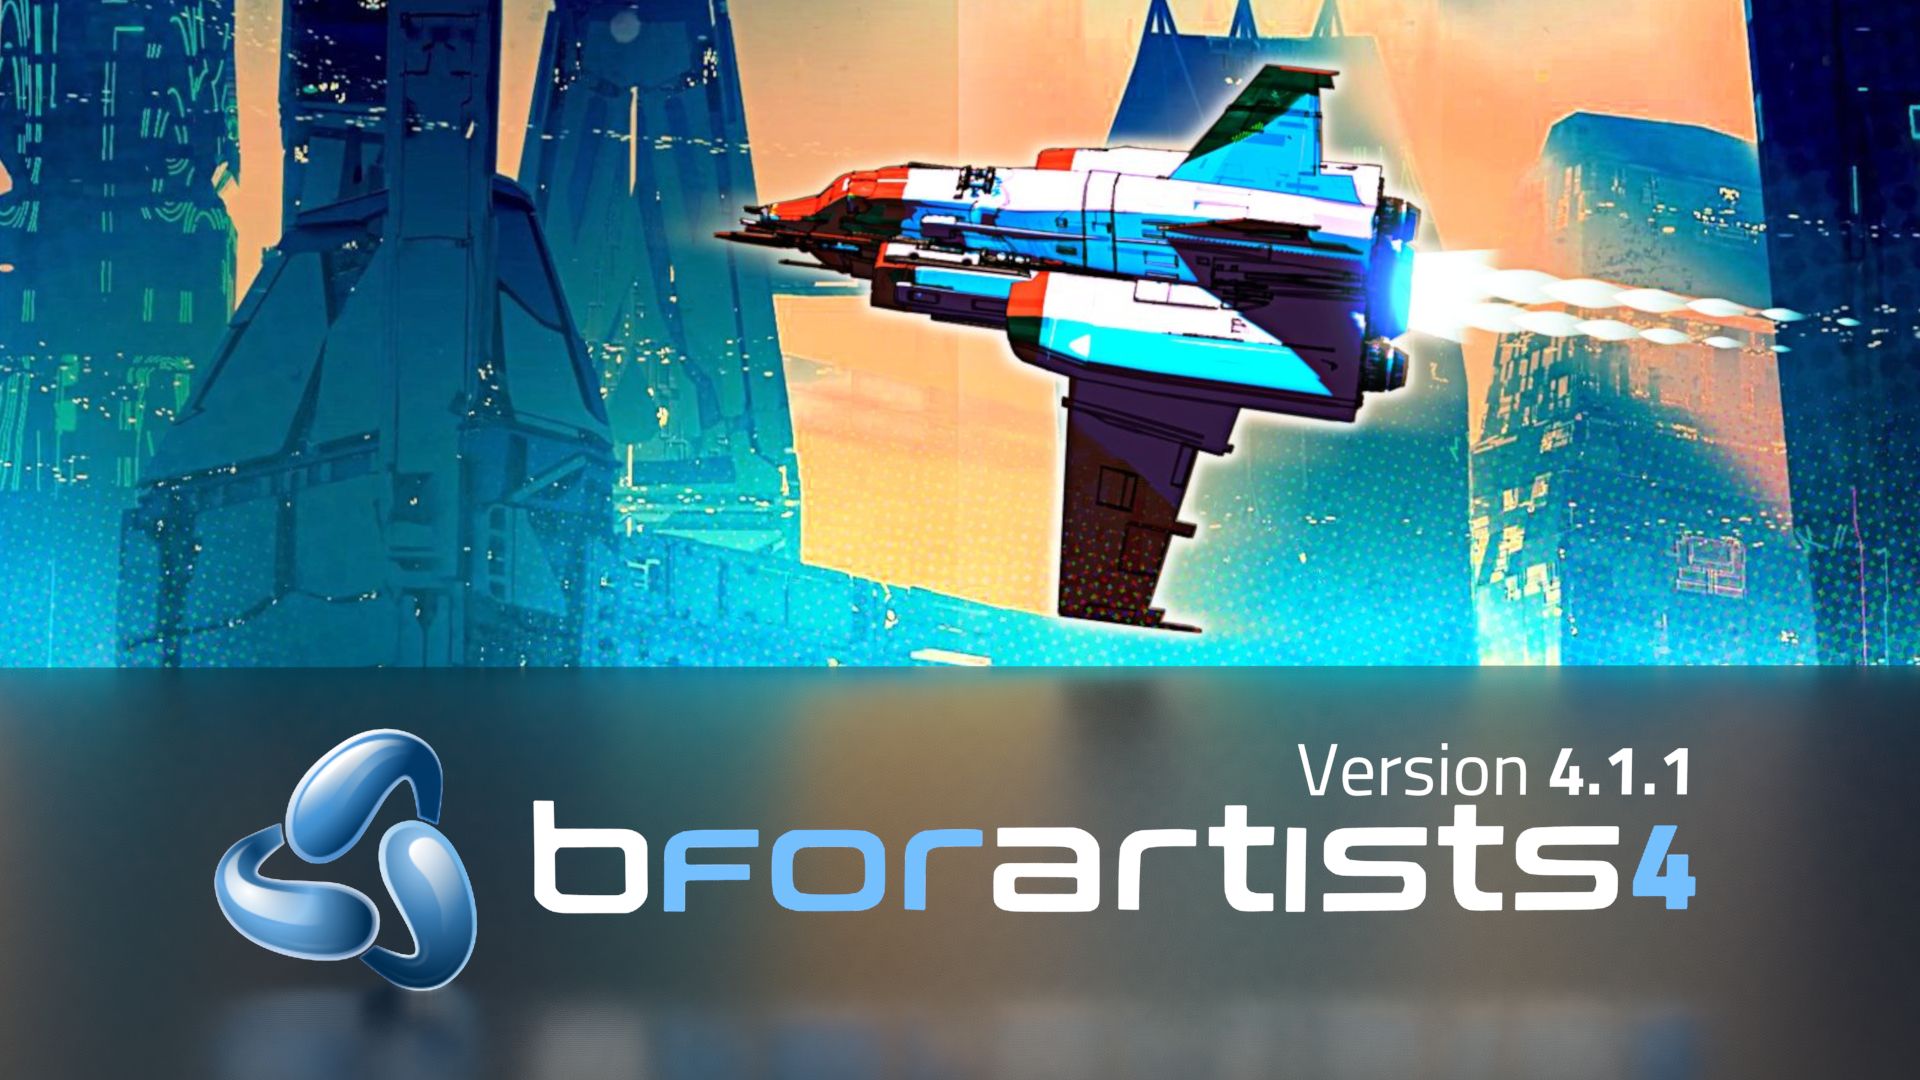 You are currently viewing Bforartists 4.1.0 Officially Released